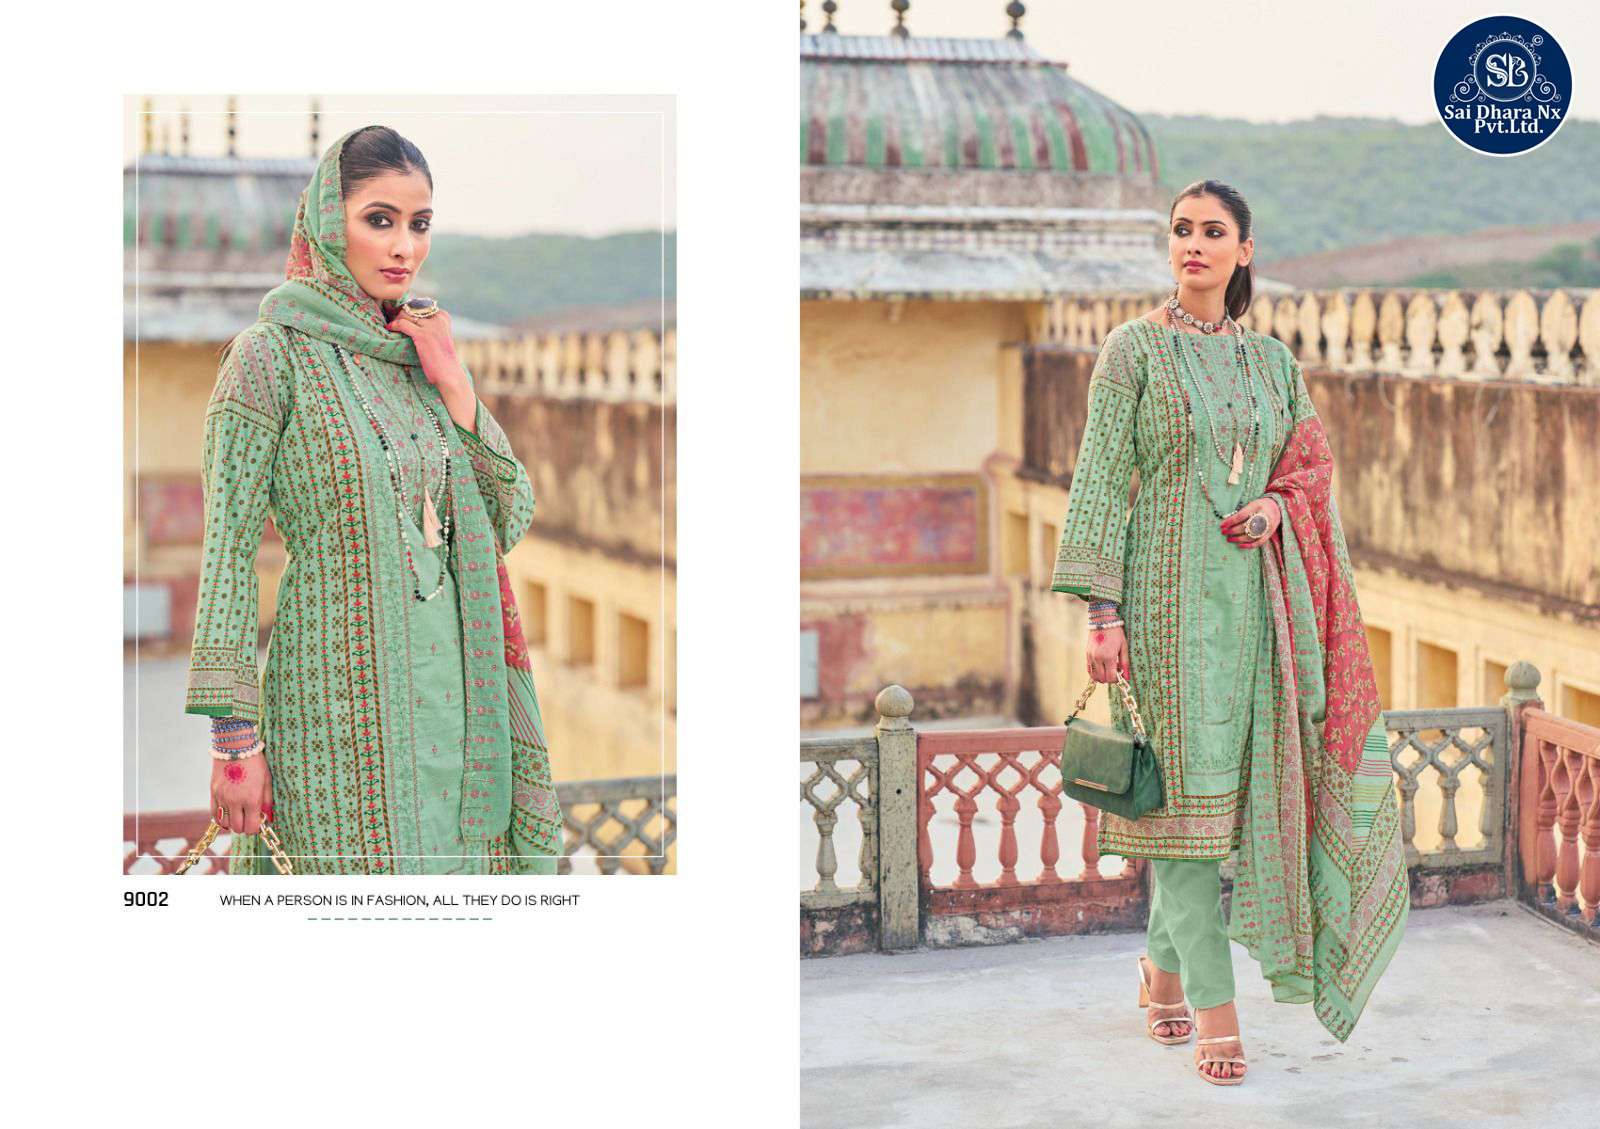 SHREE FABS PRESENTS PURE COTTON BASED EMBROIDERY WORK INDIAN 3 PIECE SUIT MATERIAL WHOLESALE SHOP IN SURAT - SaiDharaNx